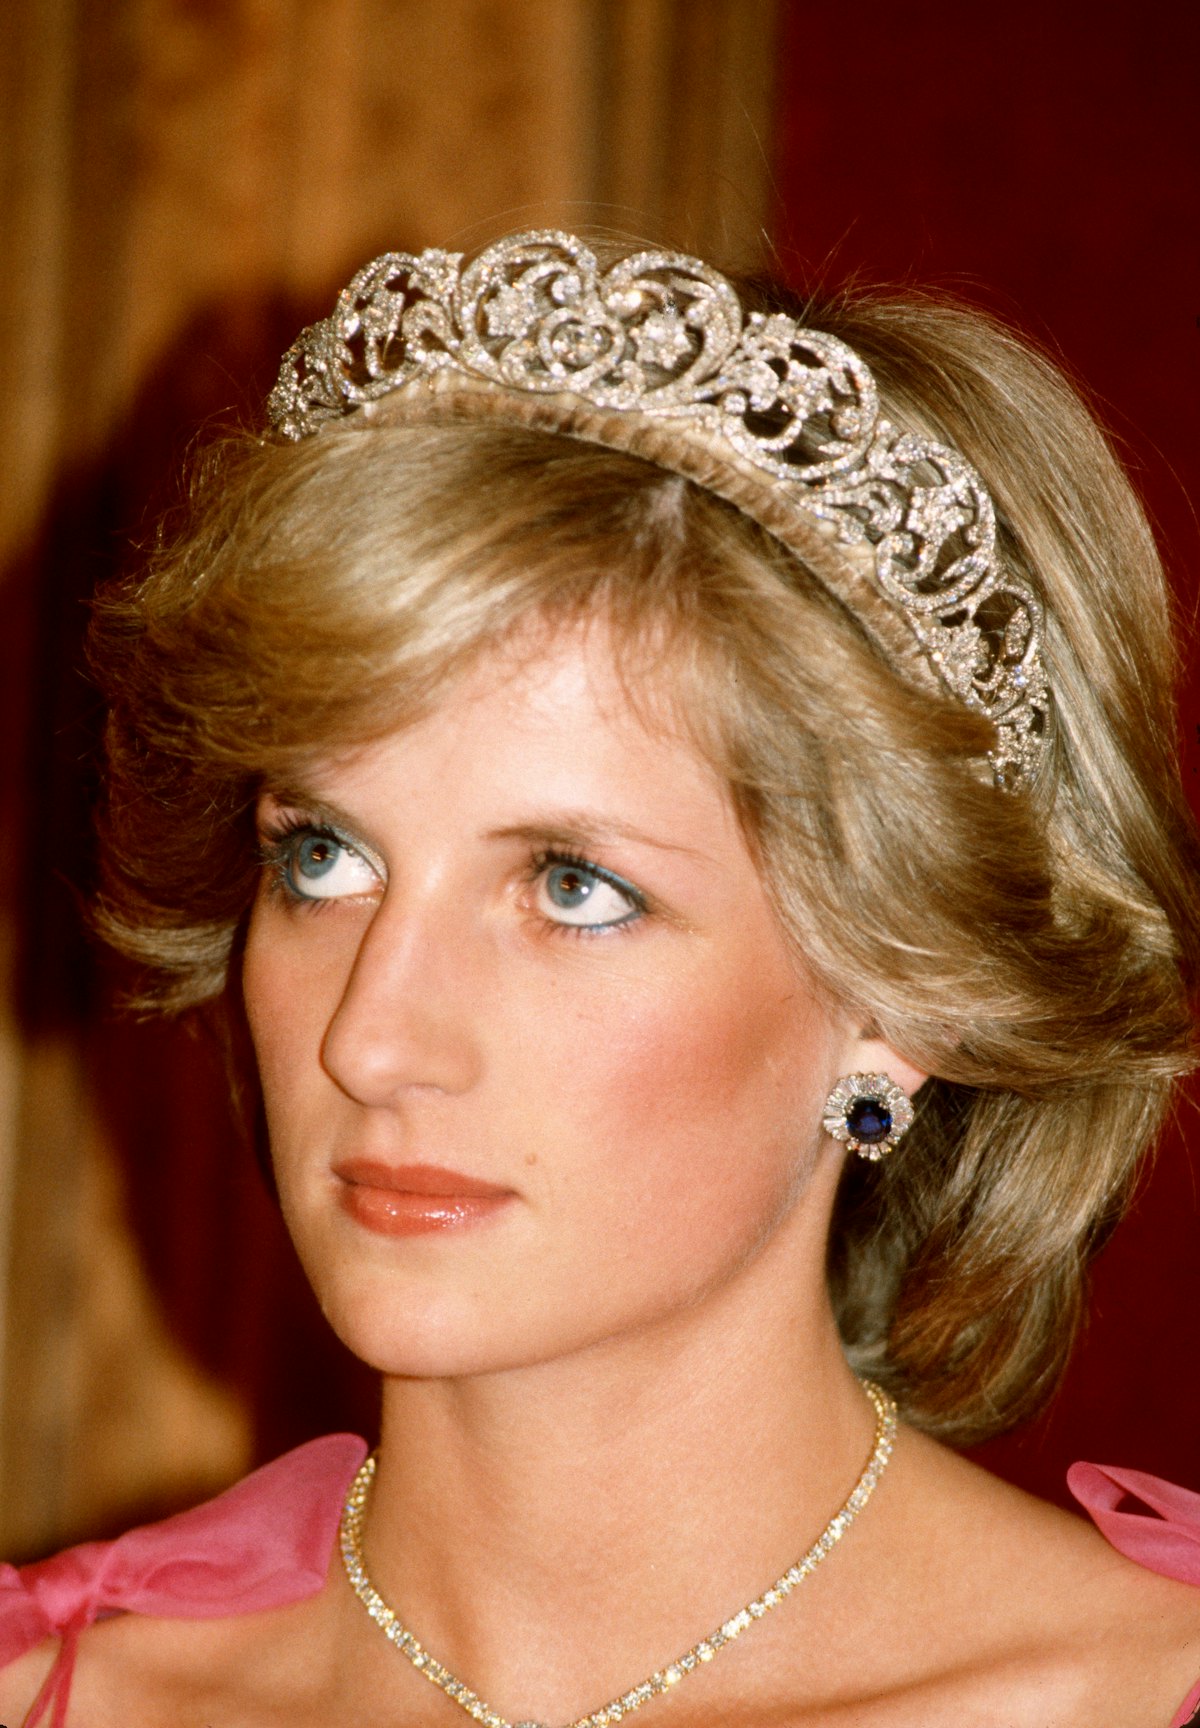 Princess Diana kept it simple when it came to cosmetics, but her timeless beauty continues to inspir...